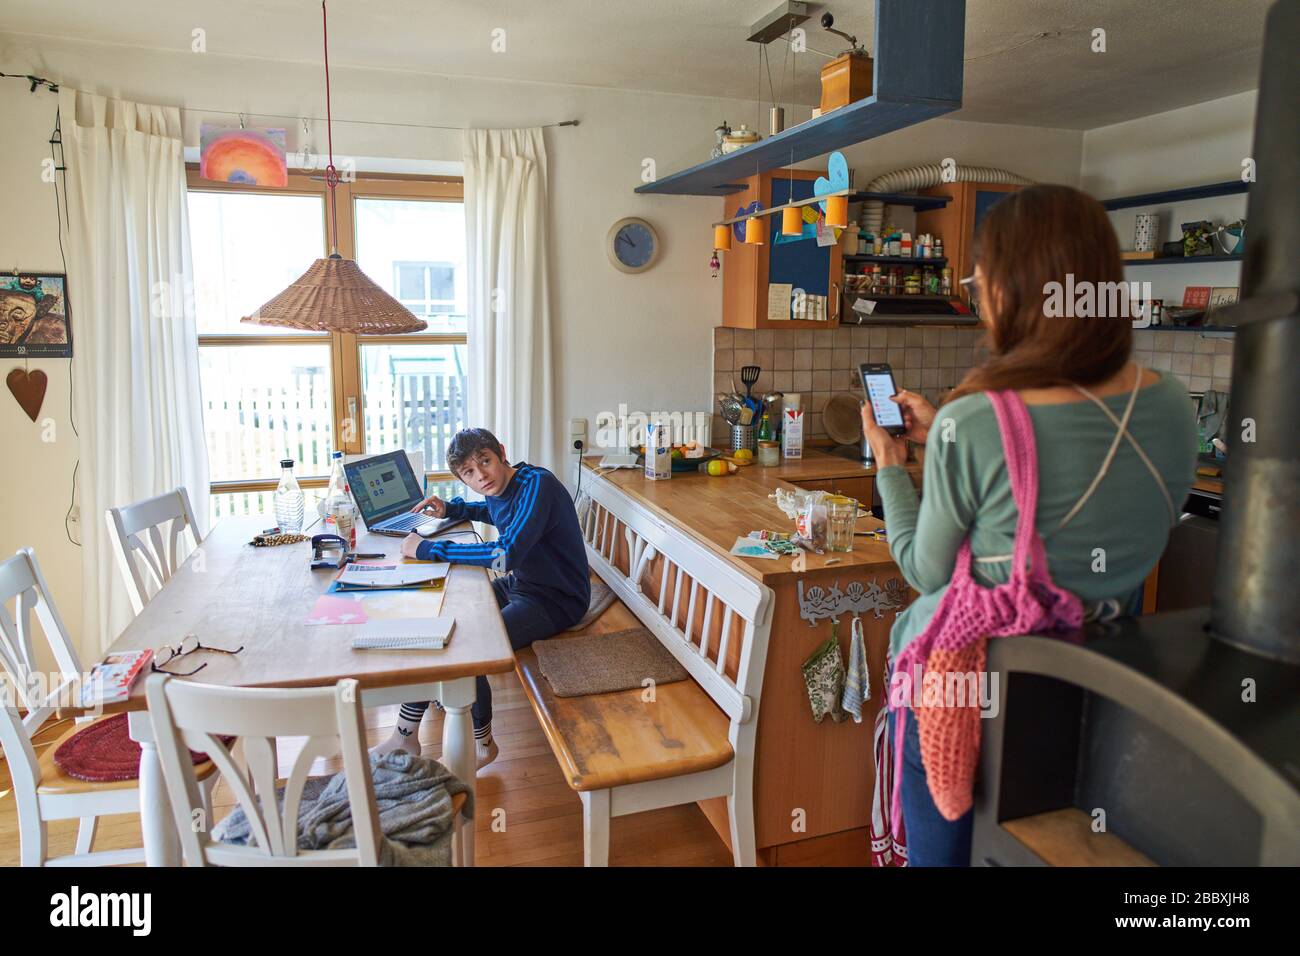 Kaufbeuren, Germany, April 01, 2020. Students with mother are frustrated and fighting while learning at home with computer and iphone due to the Corona virus disease (COVID-19) on April 01, 2020 in Kaufbeuren, Germany  Model released © Peter Schatz / Alamy Live News Stock Photo